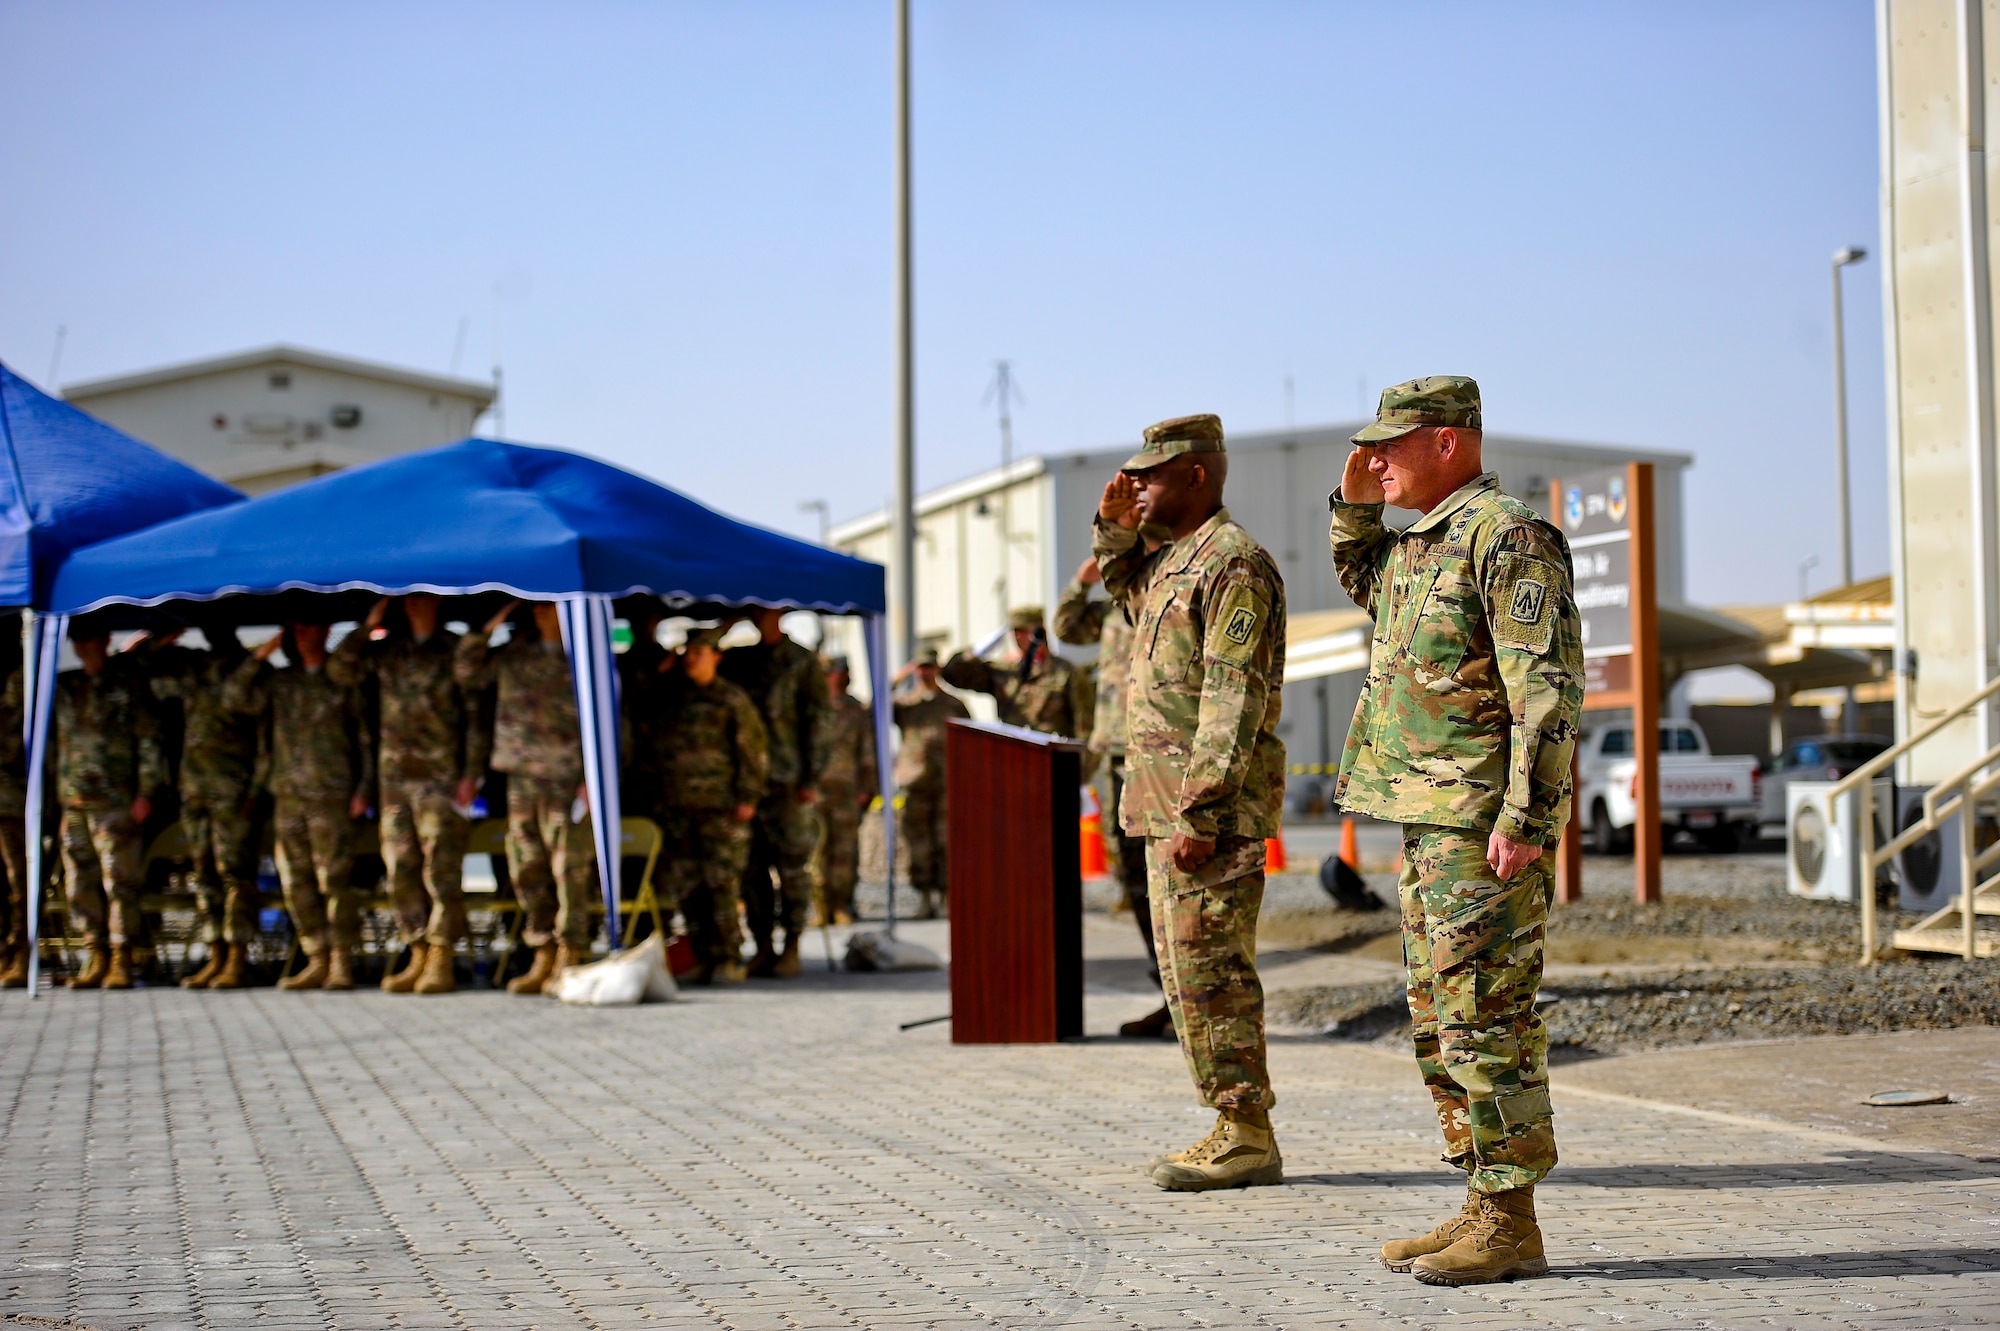 U.S. Army Command Sgt. Maj. Robert Bell and Command Sgt. Maj. Robert Walker salute the soldiers of the 1st Battalion, 7th Air Defense Artillery as the honor guard presents the nation's colors and battalion colors during the change of responsibility ceremony at Al Dhafra Air Base, United Arab Emirates, March 11, 2018. The 1st Battalion, 7th Air Defense Artillery Regiment was first constituted on March 8, 1898 at Fort Slocum, New York. 

 (U.S. Air Force photo by Tech. Sgt. Anthony Nelson Jr)